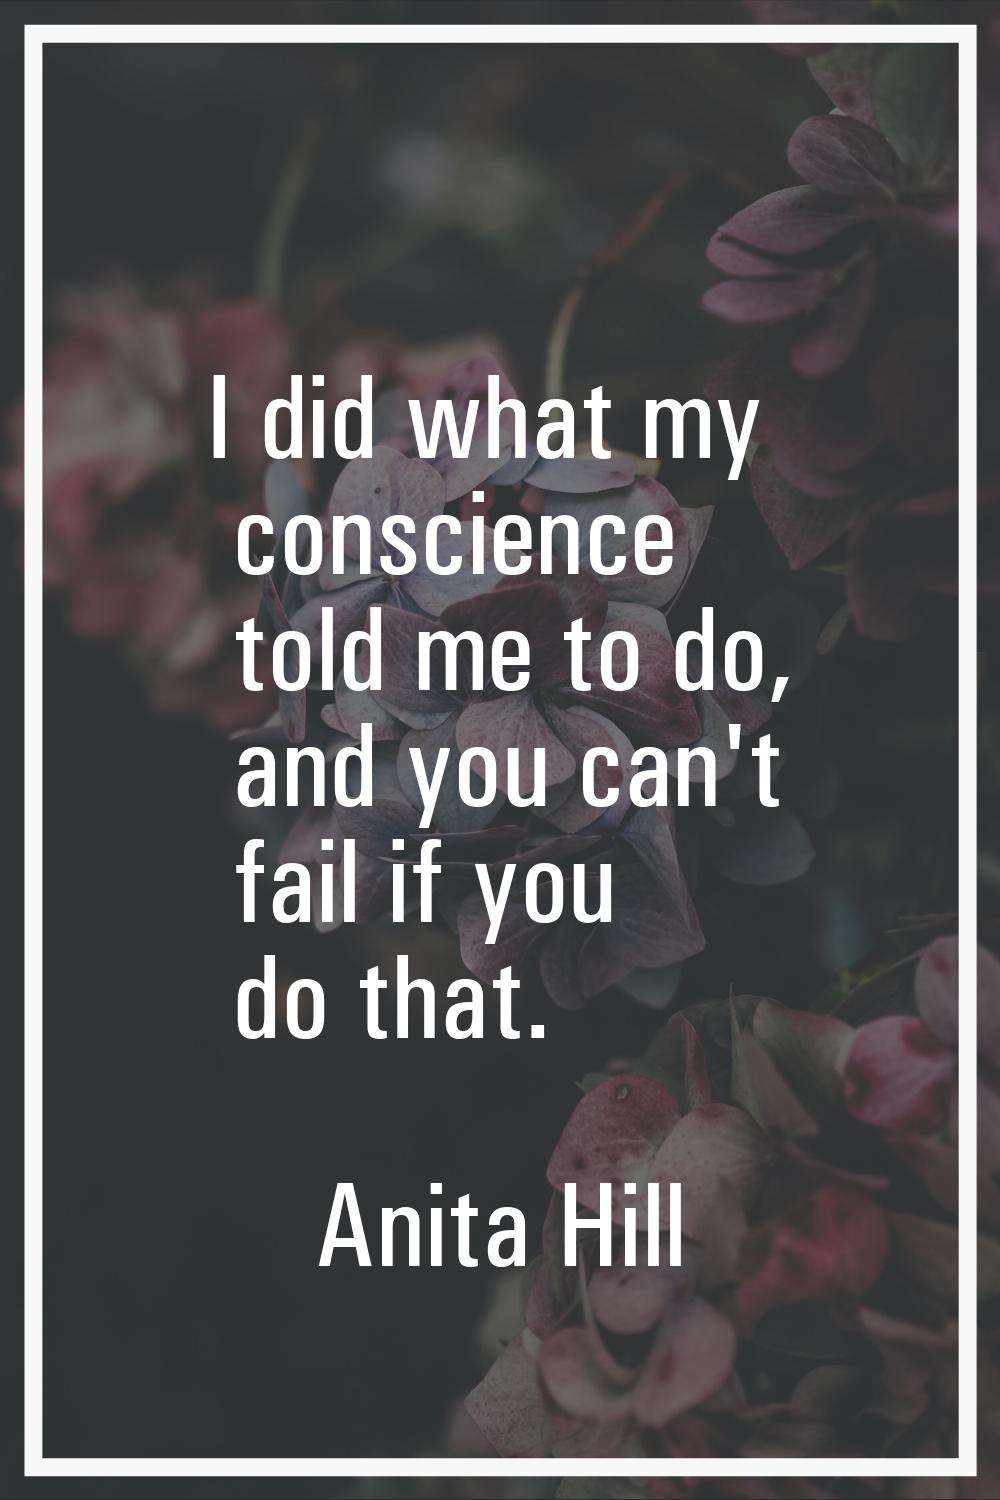 I did what my conscience told me to do, and you can't fail if you do that.